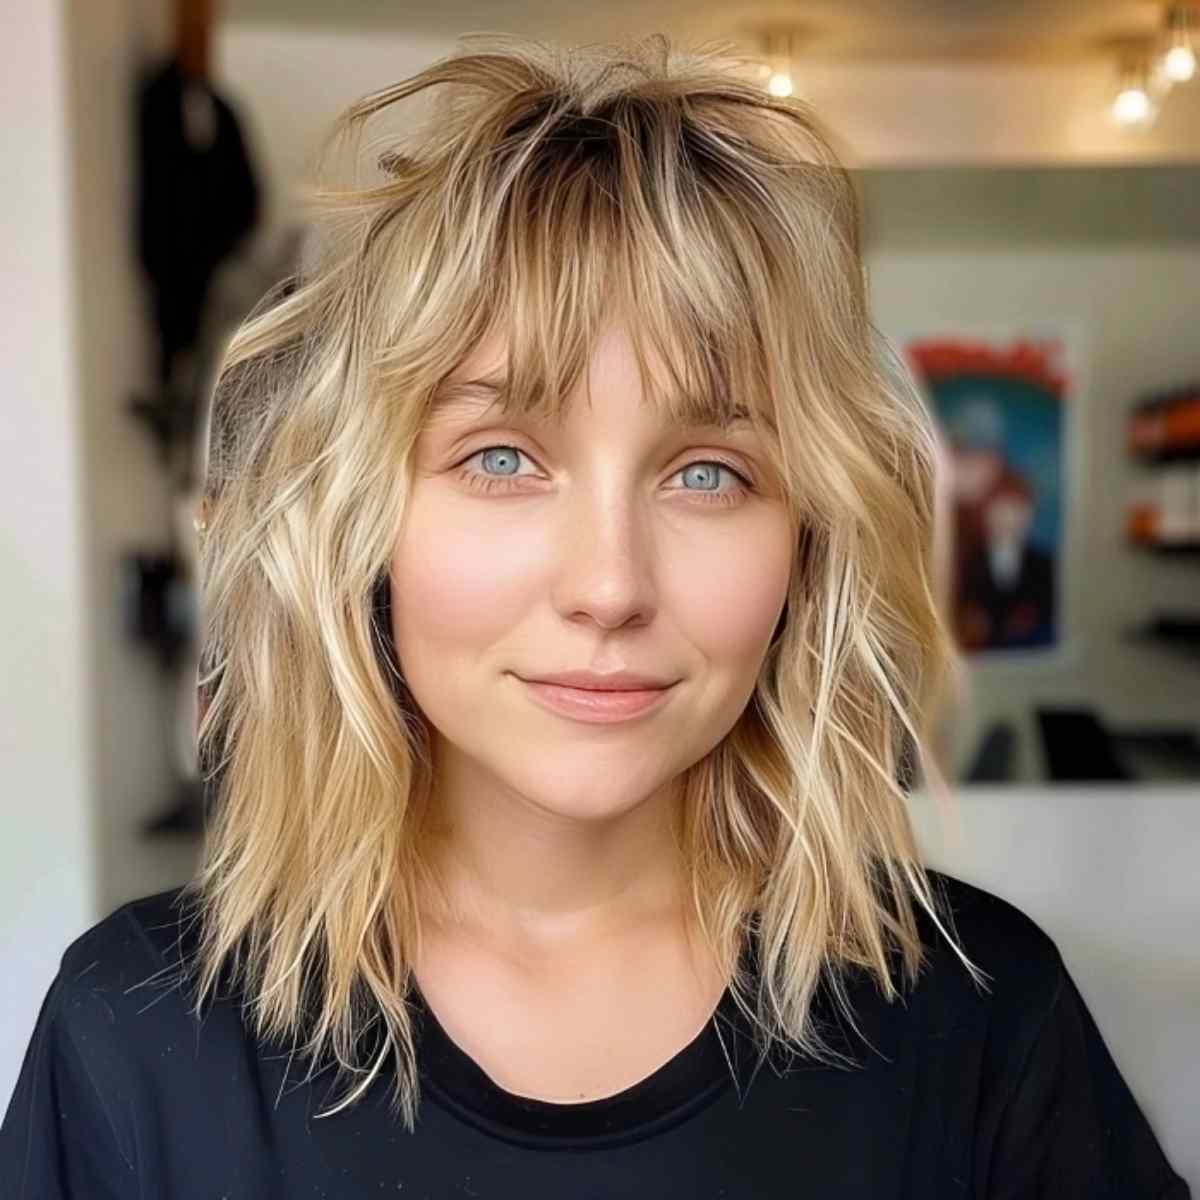 Layered Shoulder-Length Shag with Bangs for Oval Faces